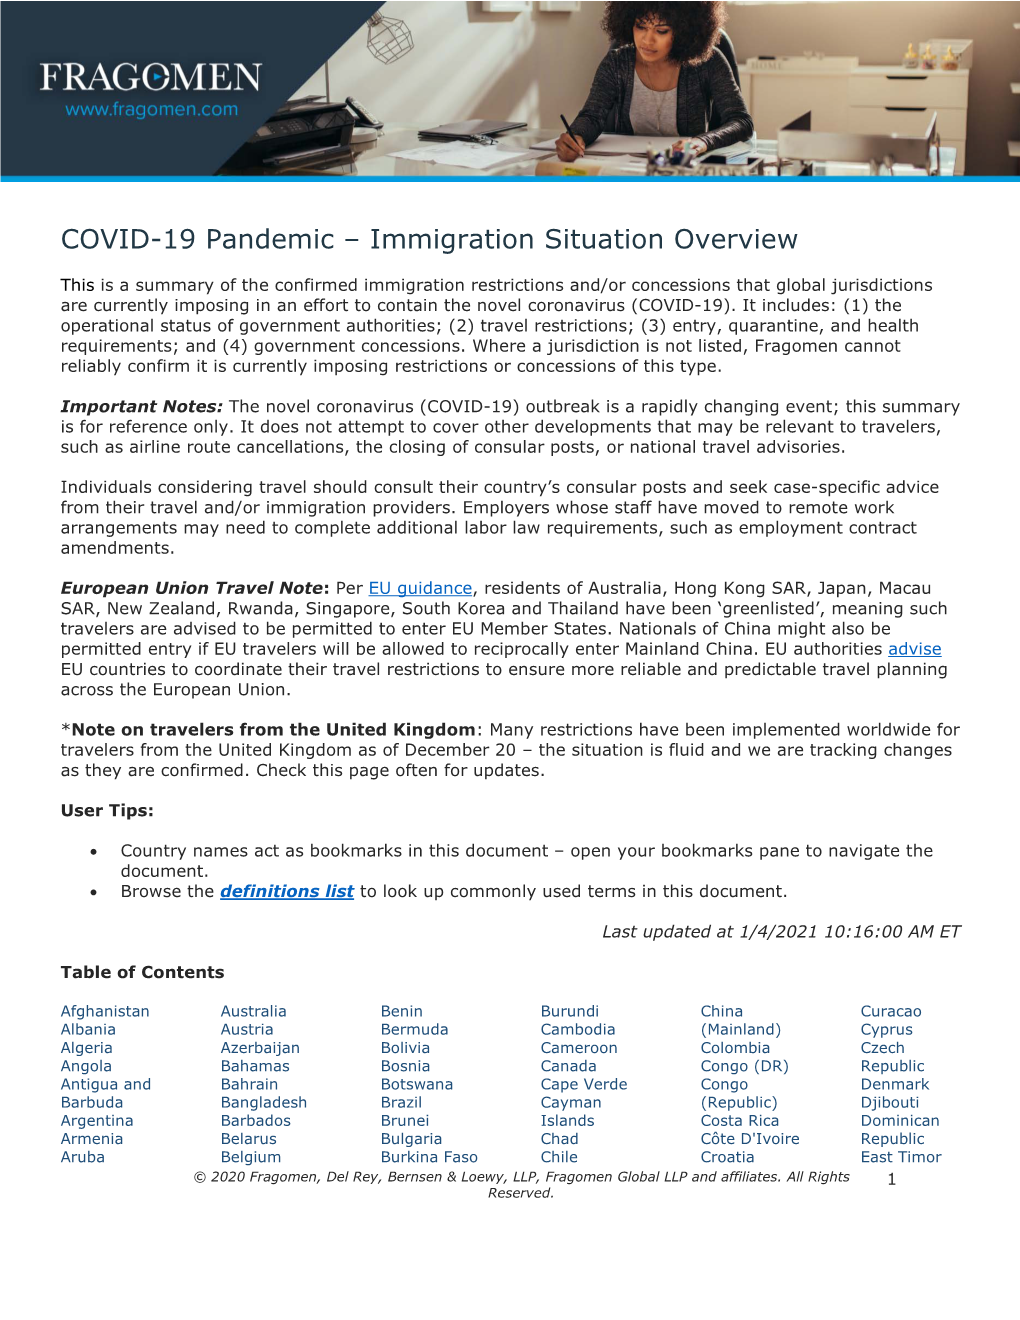 Immigration Situation Overview